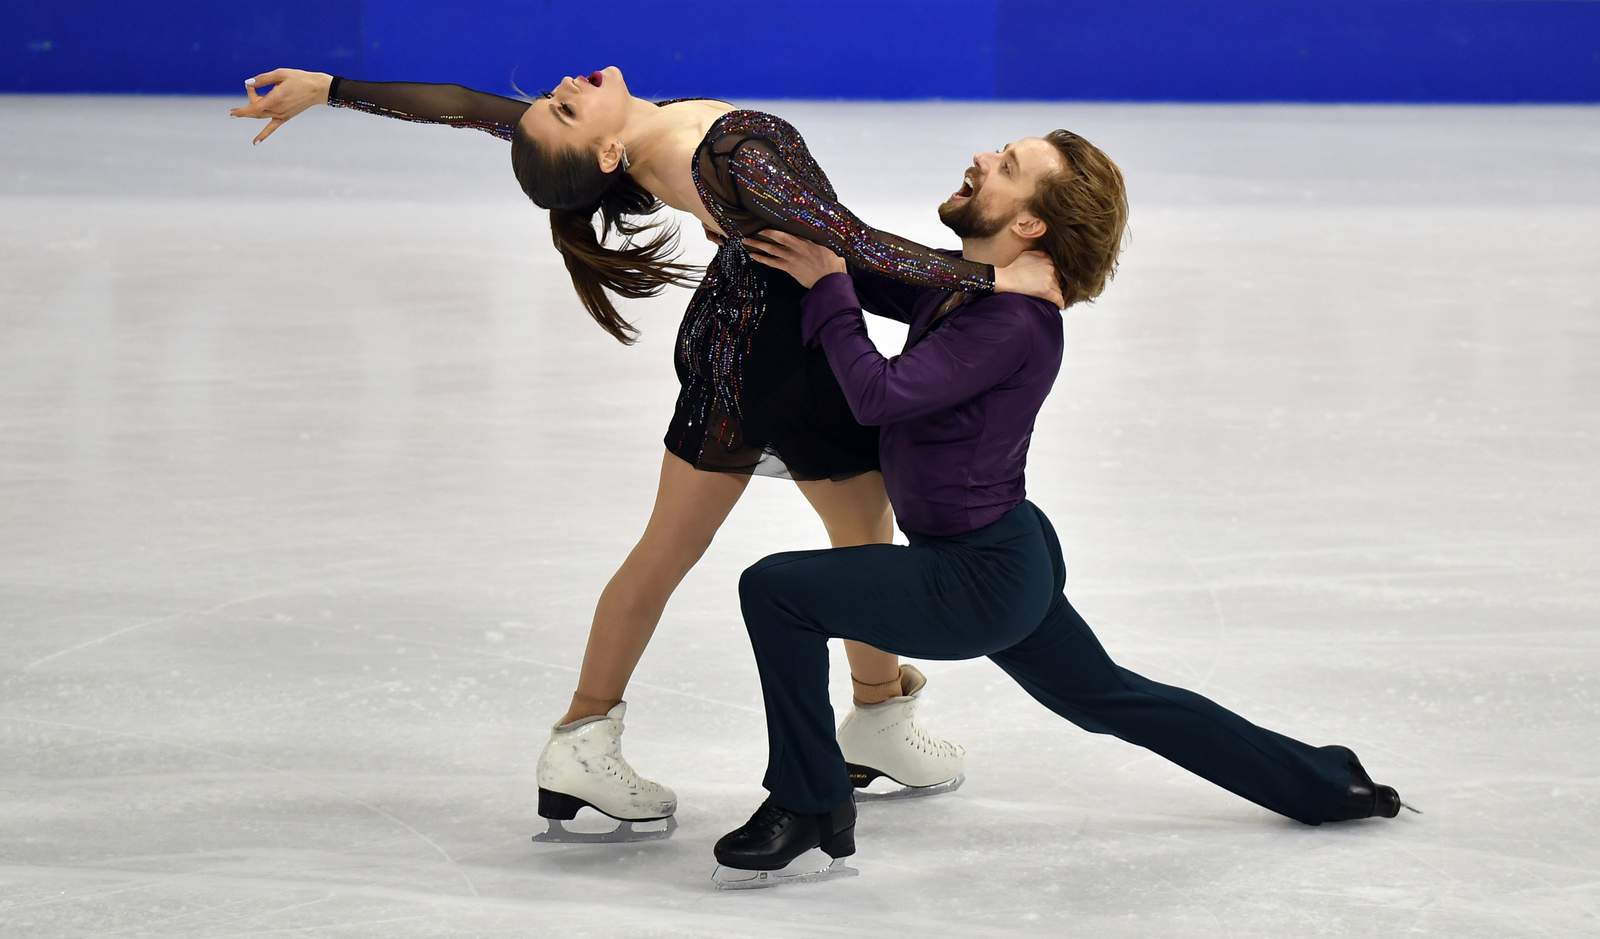 Russian win rhythm dance to extend command at skating worlds